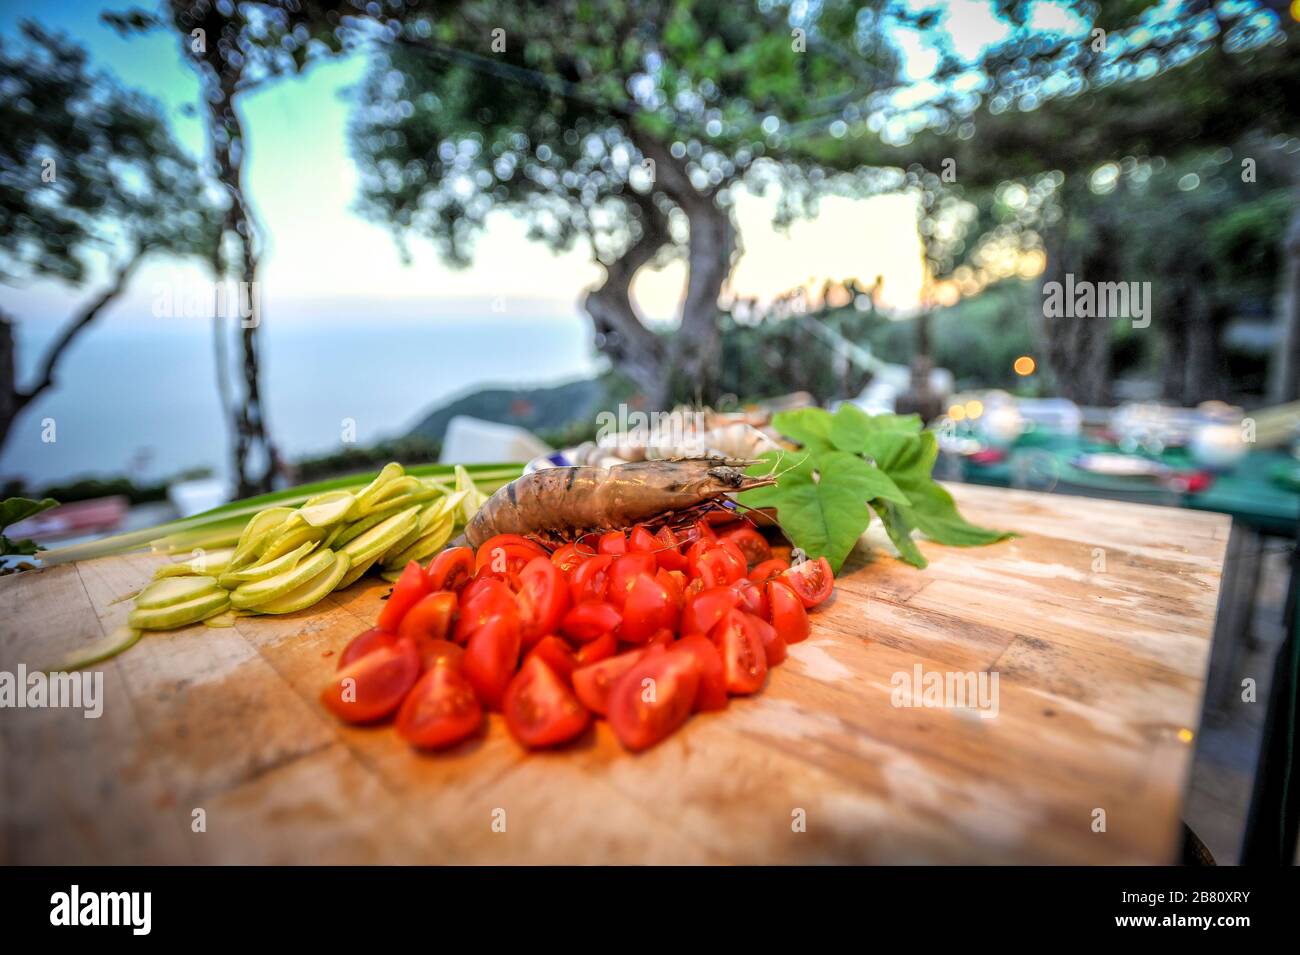 Chopped cherry tomatoes with zucchini and shrimp. Stock Photo